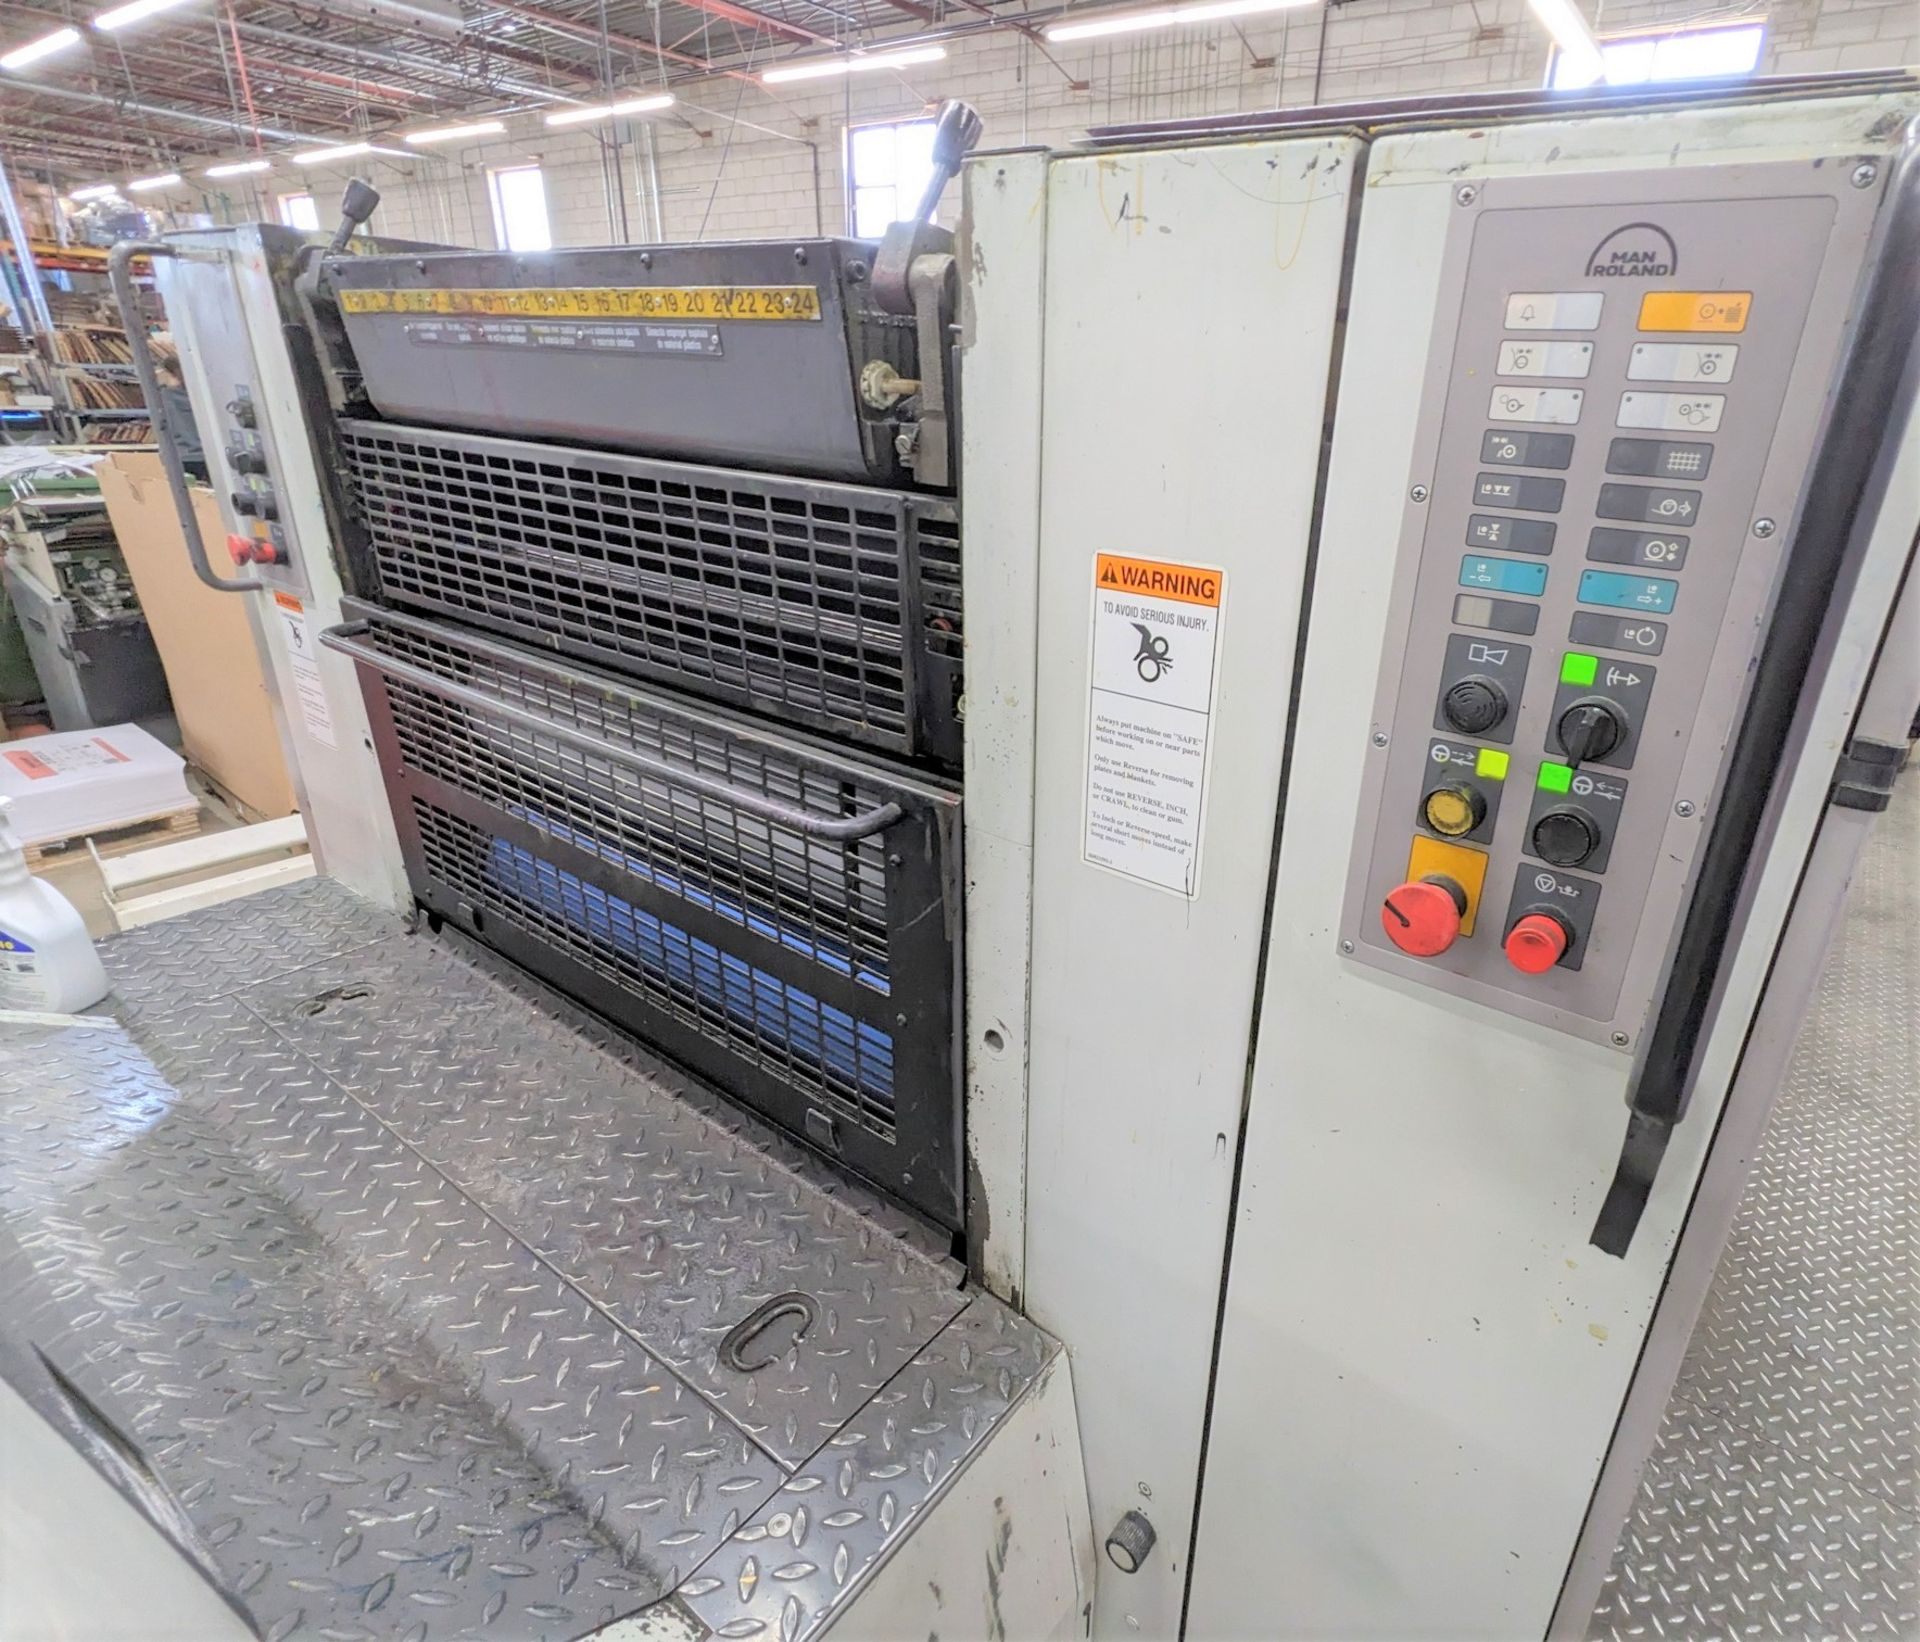 1995 MAN ROLAND 300 6-COLOUR OFFSET PRINTING PRESS, MODEL R306, S/N 25152B, TOTAL SHEET COUNT - Image 45 of 53